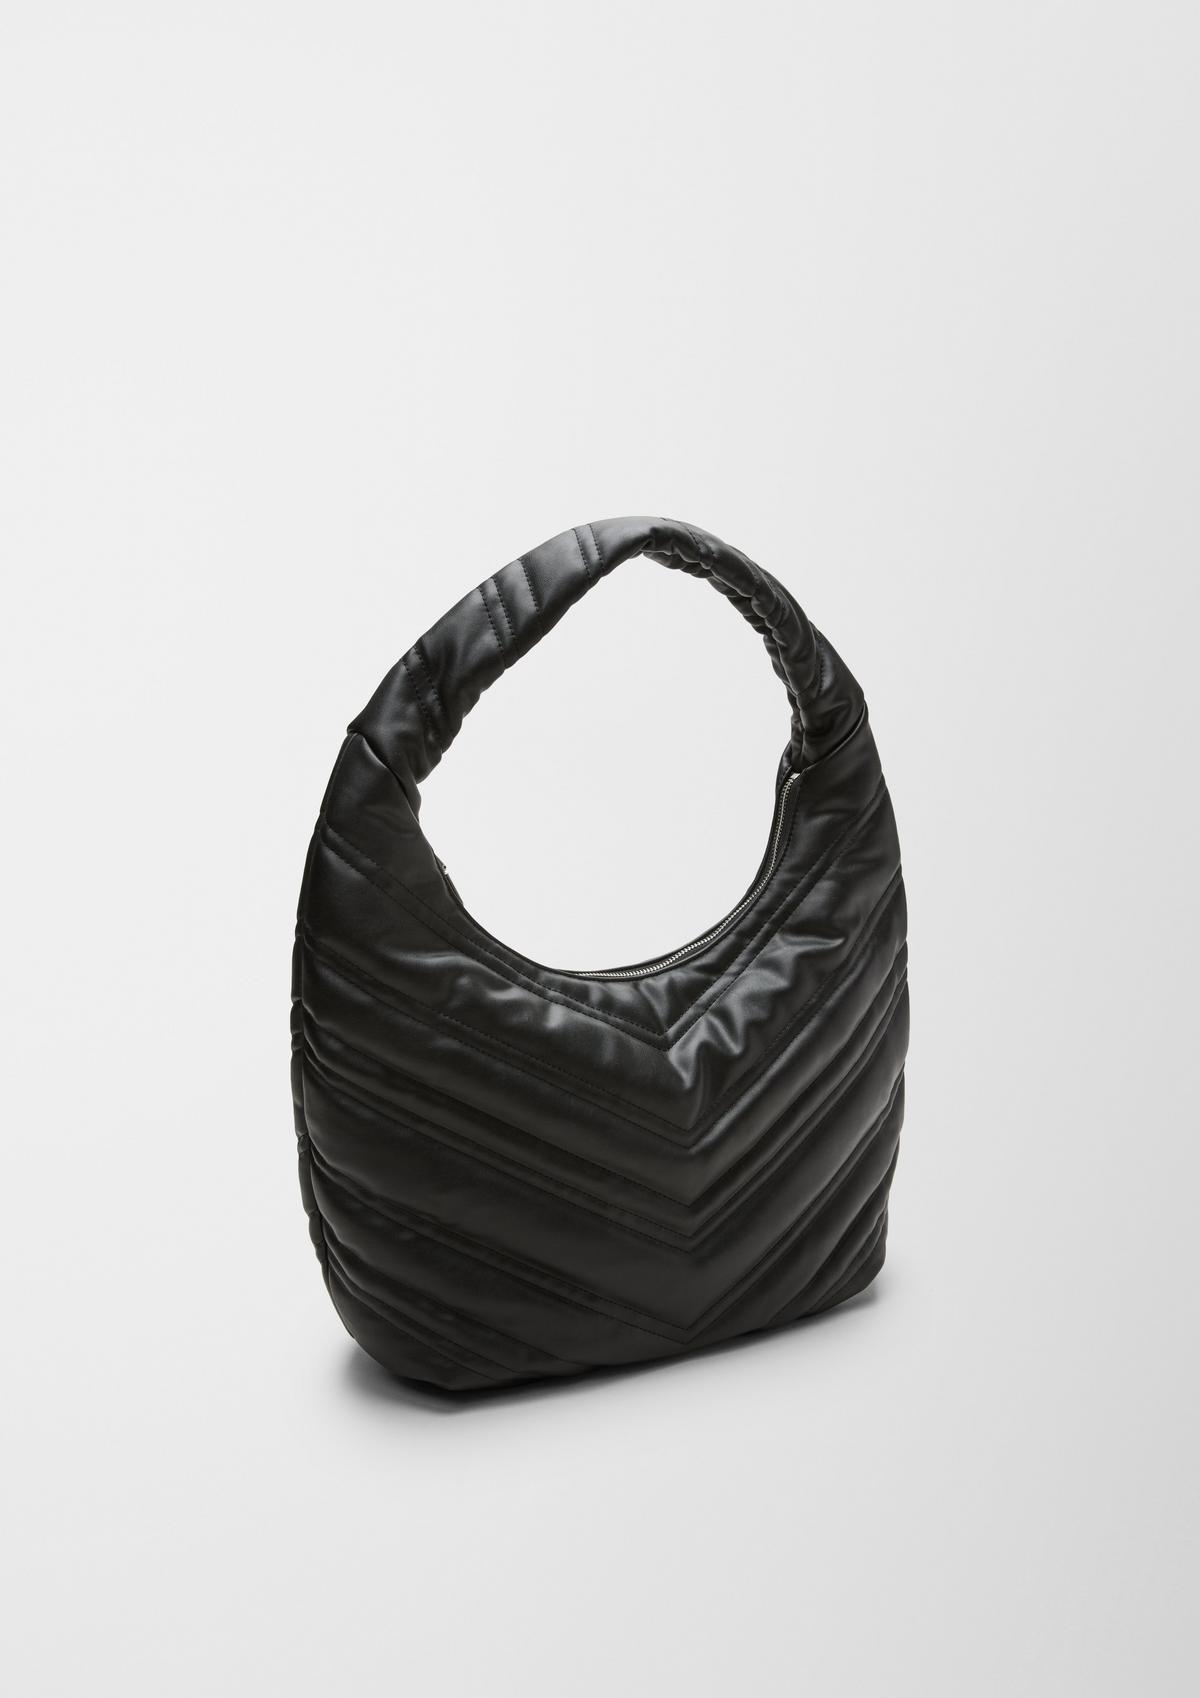 s.Oliver Hobo bag with a quilted texture